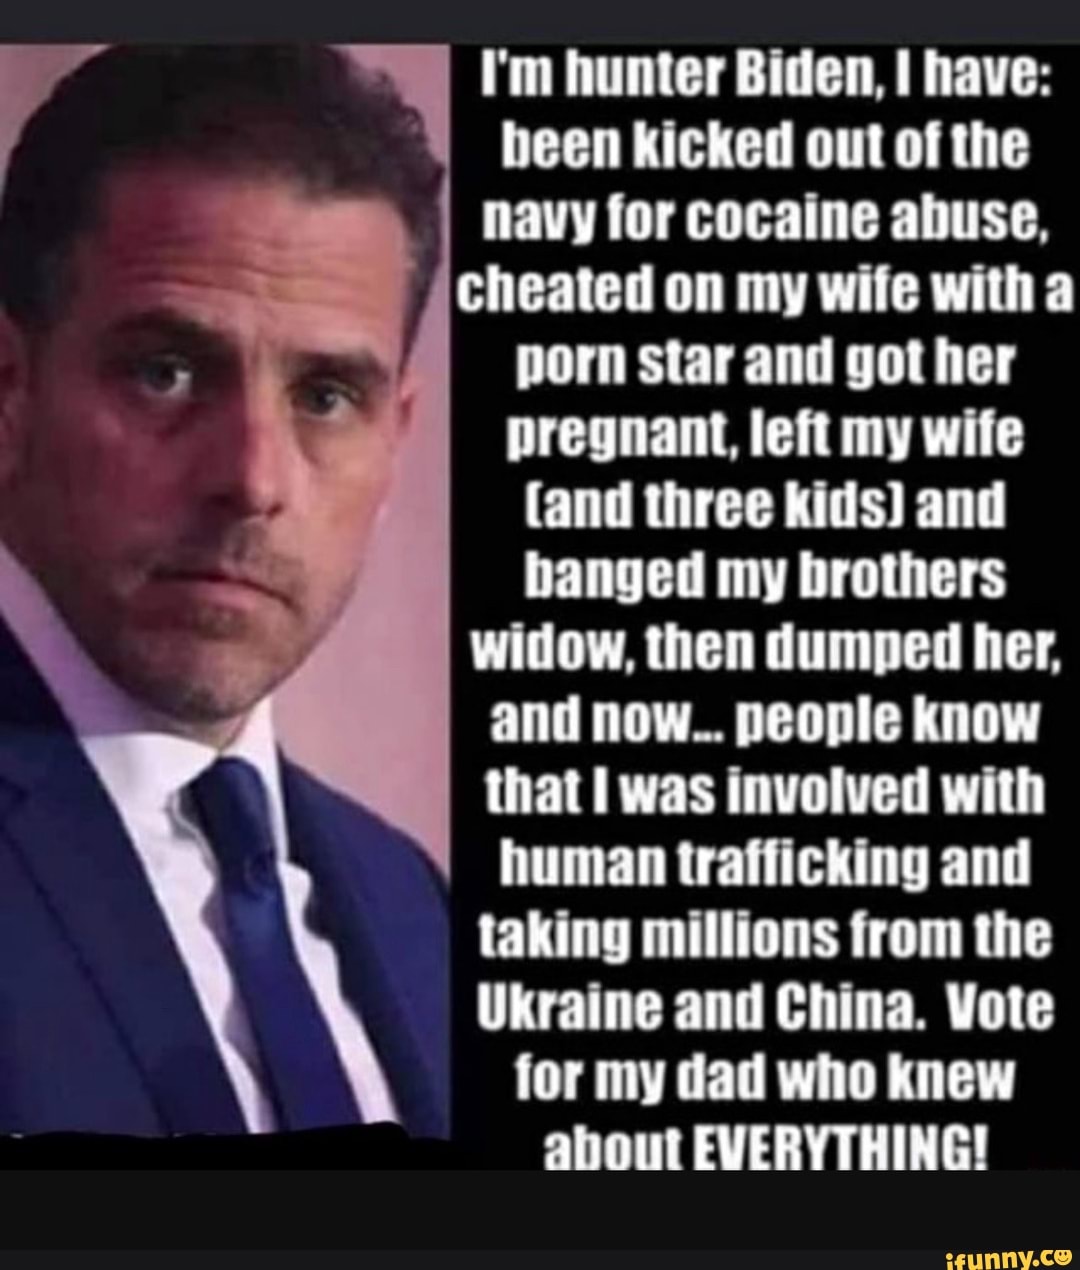 My Wife Is A Porn Star - I'm hunter Biden, I have: been kicked out of the navy for cocaine abuse,  cheated